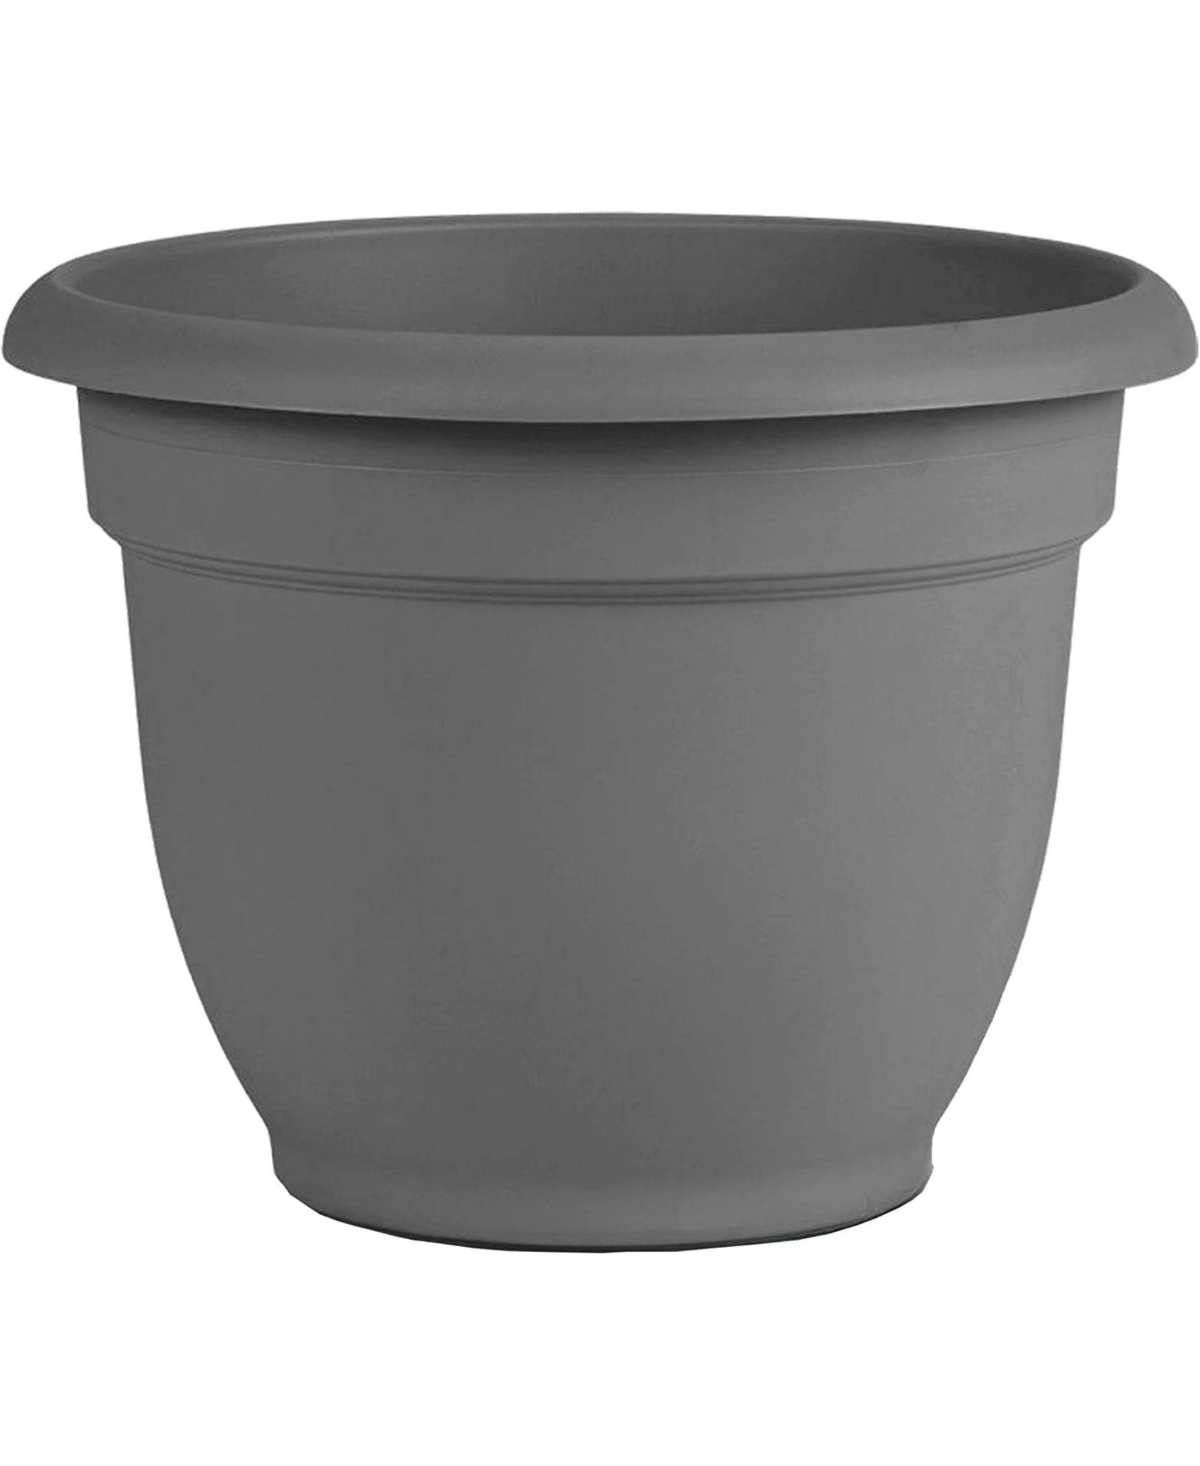 AP20908 Ariana Plastic Planter w/ Self-Watering Disk, Charcoal, 20 inches - Charcoal